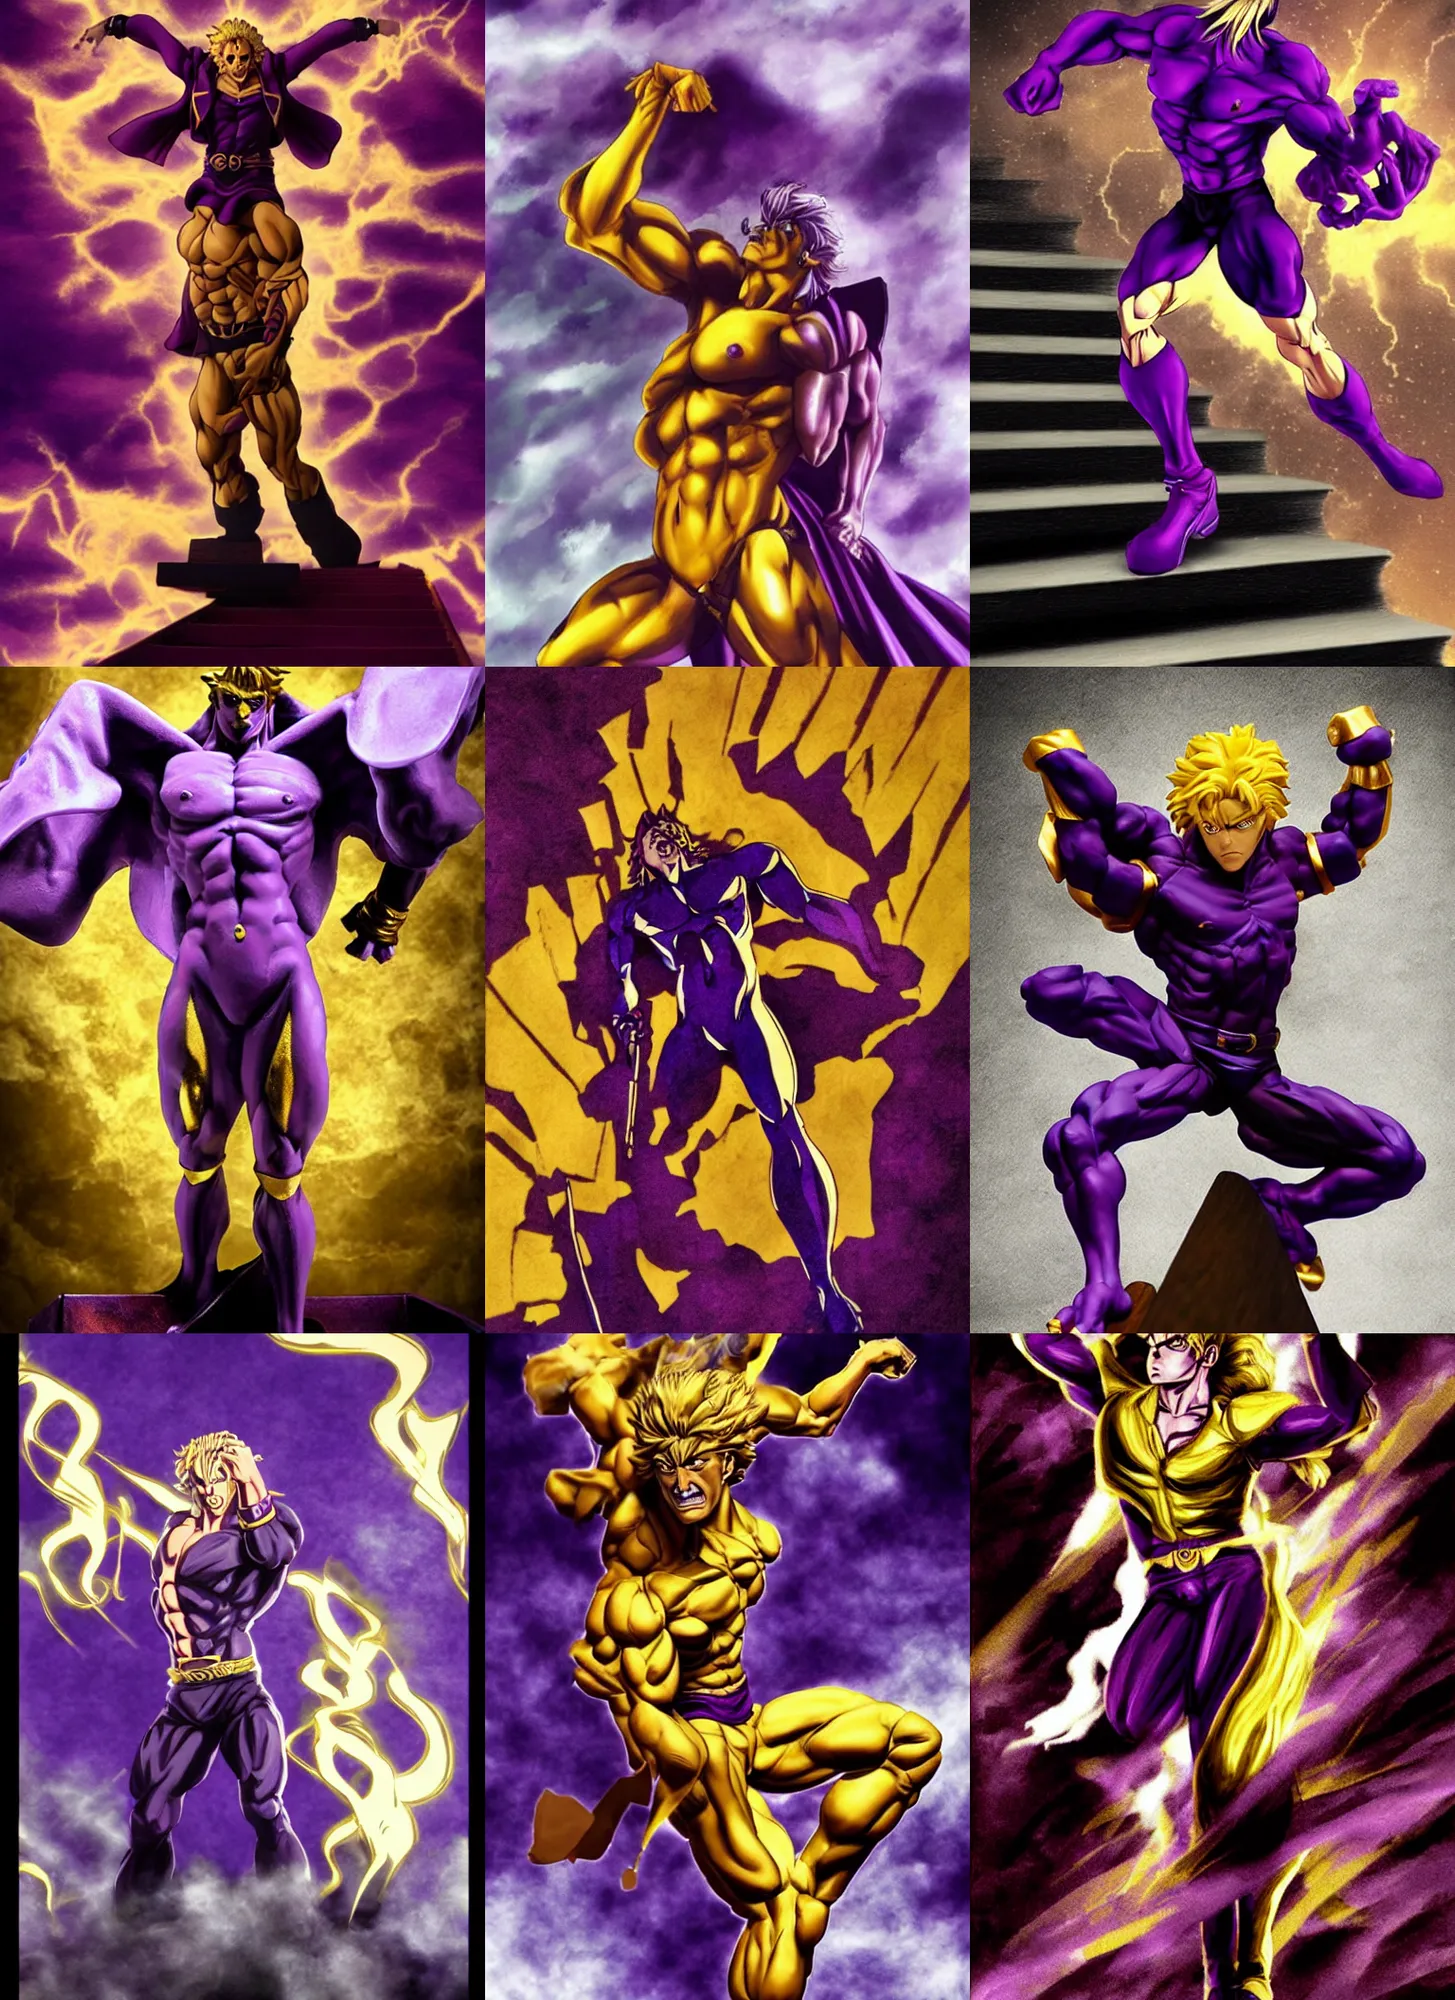 Prompt: DIO fron Jojo standing menacingly atop a flight of stairs, shitless, muscled body, exaggerated pose, dramatic rim lighting, highly detailed, sharp, smoke, vignette effect, purple and gold color scheme